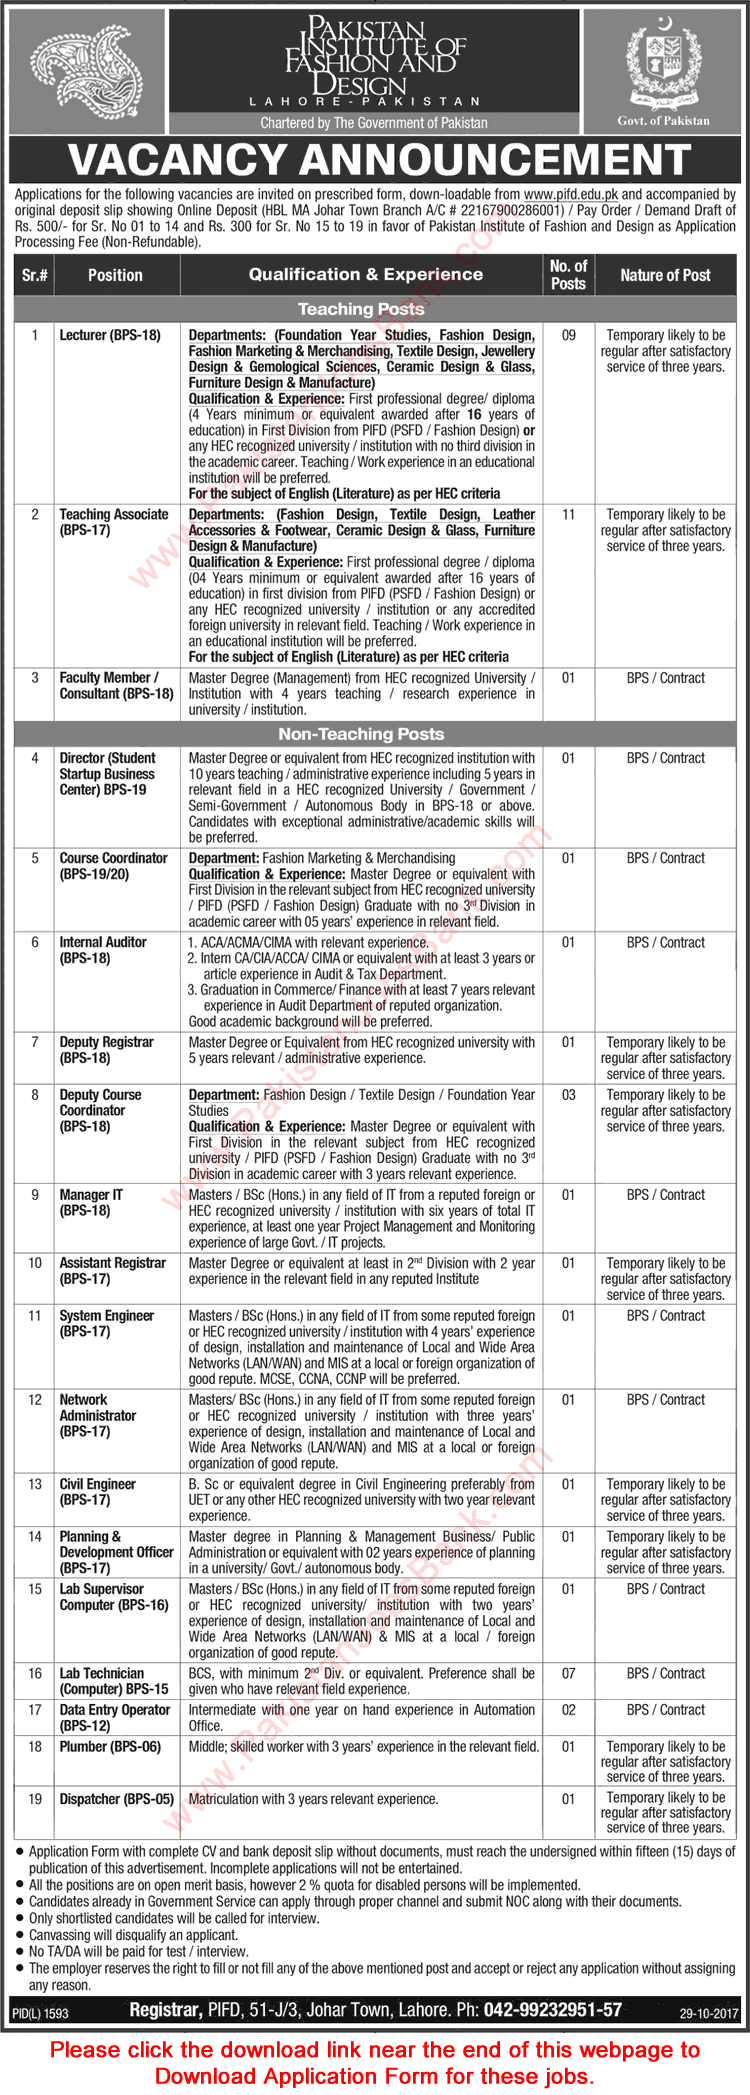 Pakistan Institute of Fashion and Design Lahore Jobs October 2017 November Application Form PIFD Latest